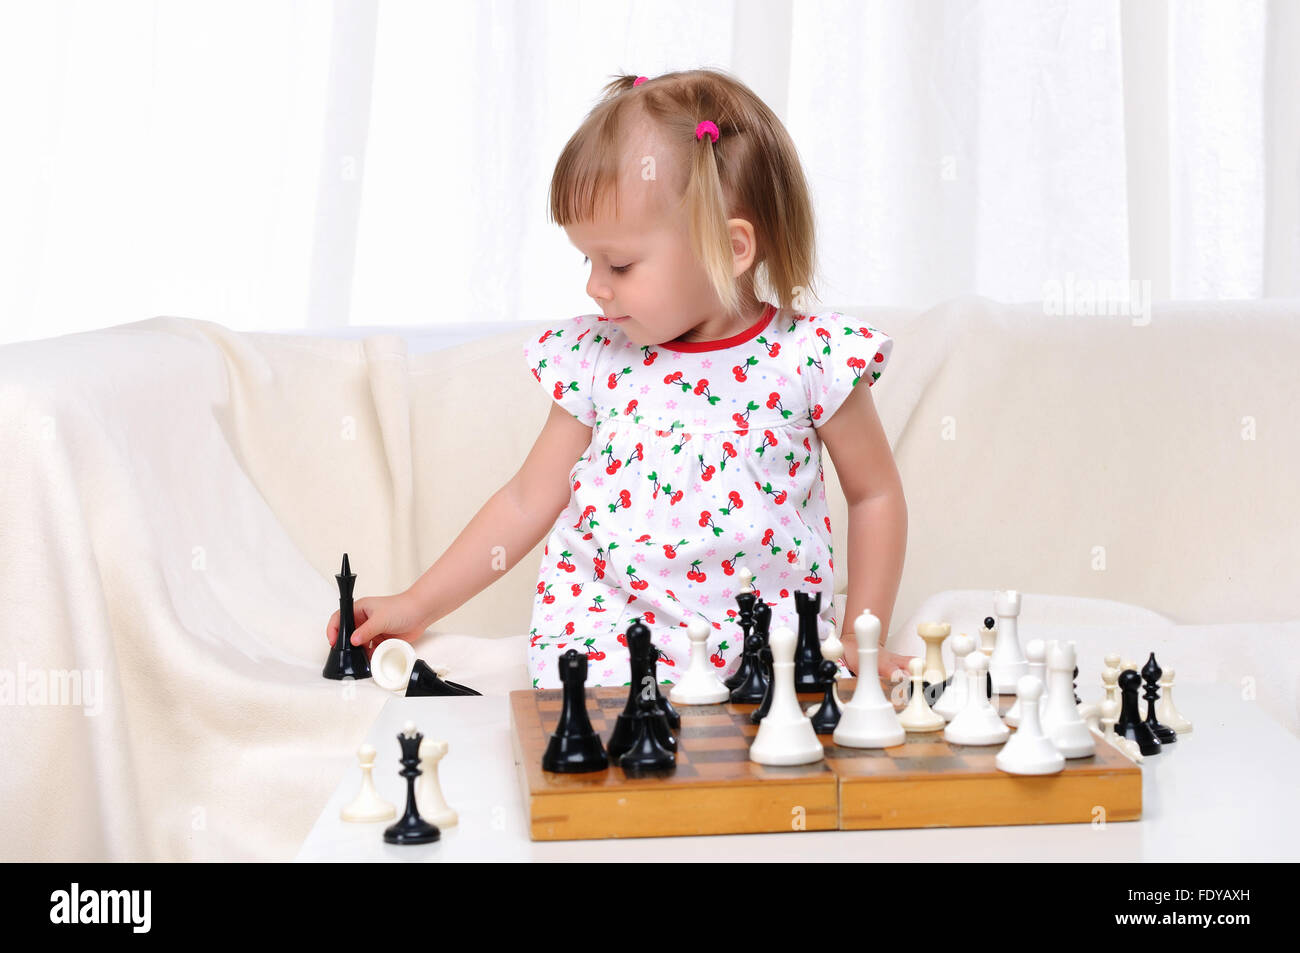 Play chess stock image. Image of games, intelligence - 14879483